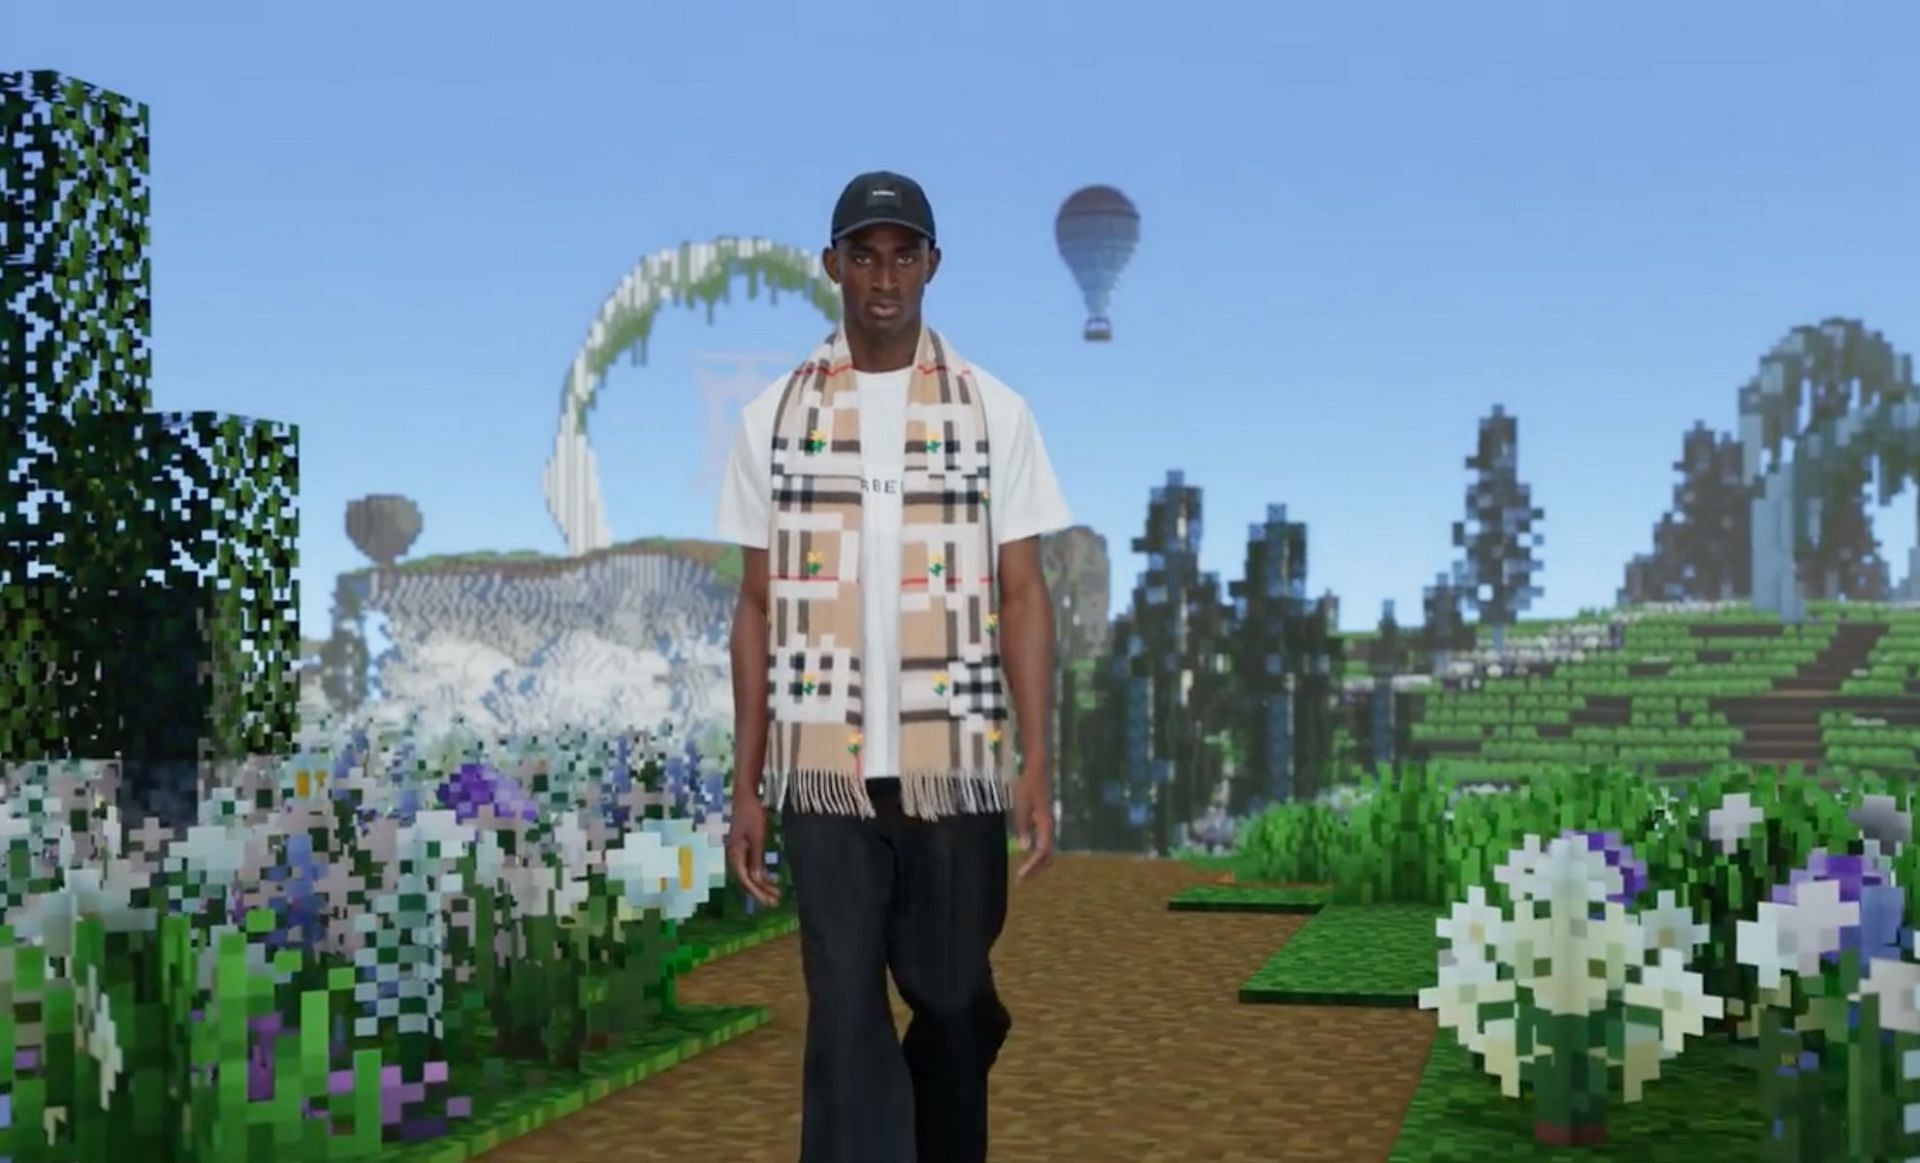 Burberry releases digital clothing collection in video game Minecraft